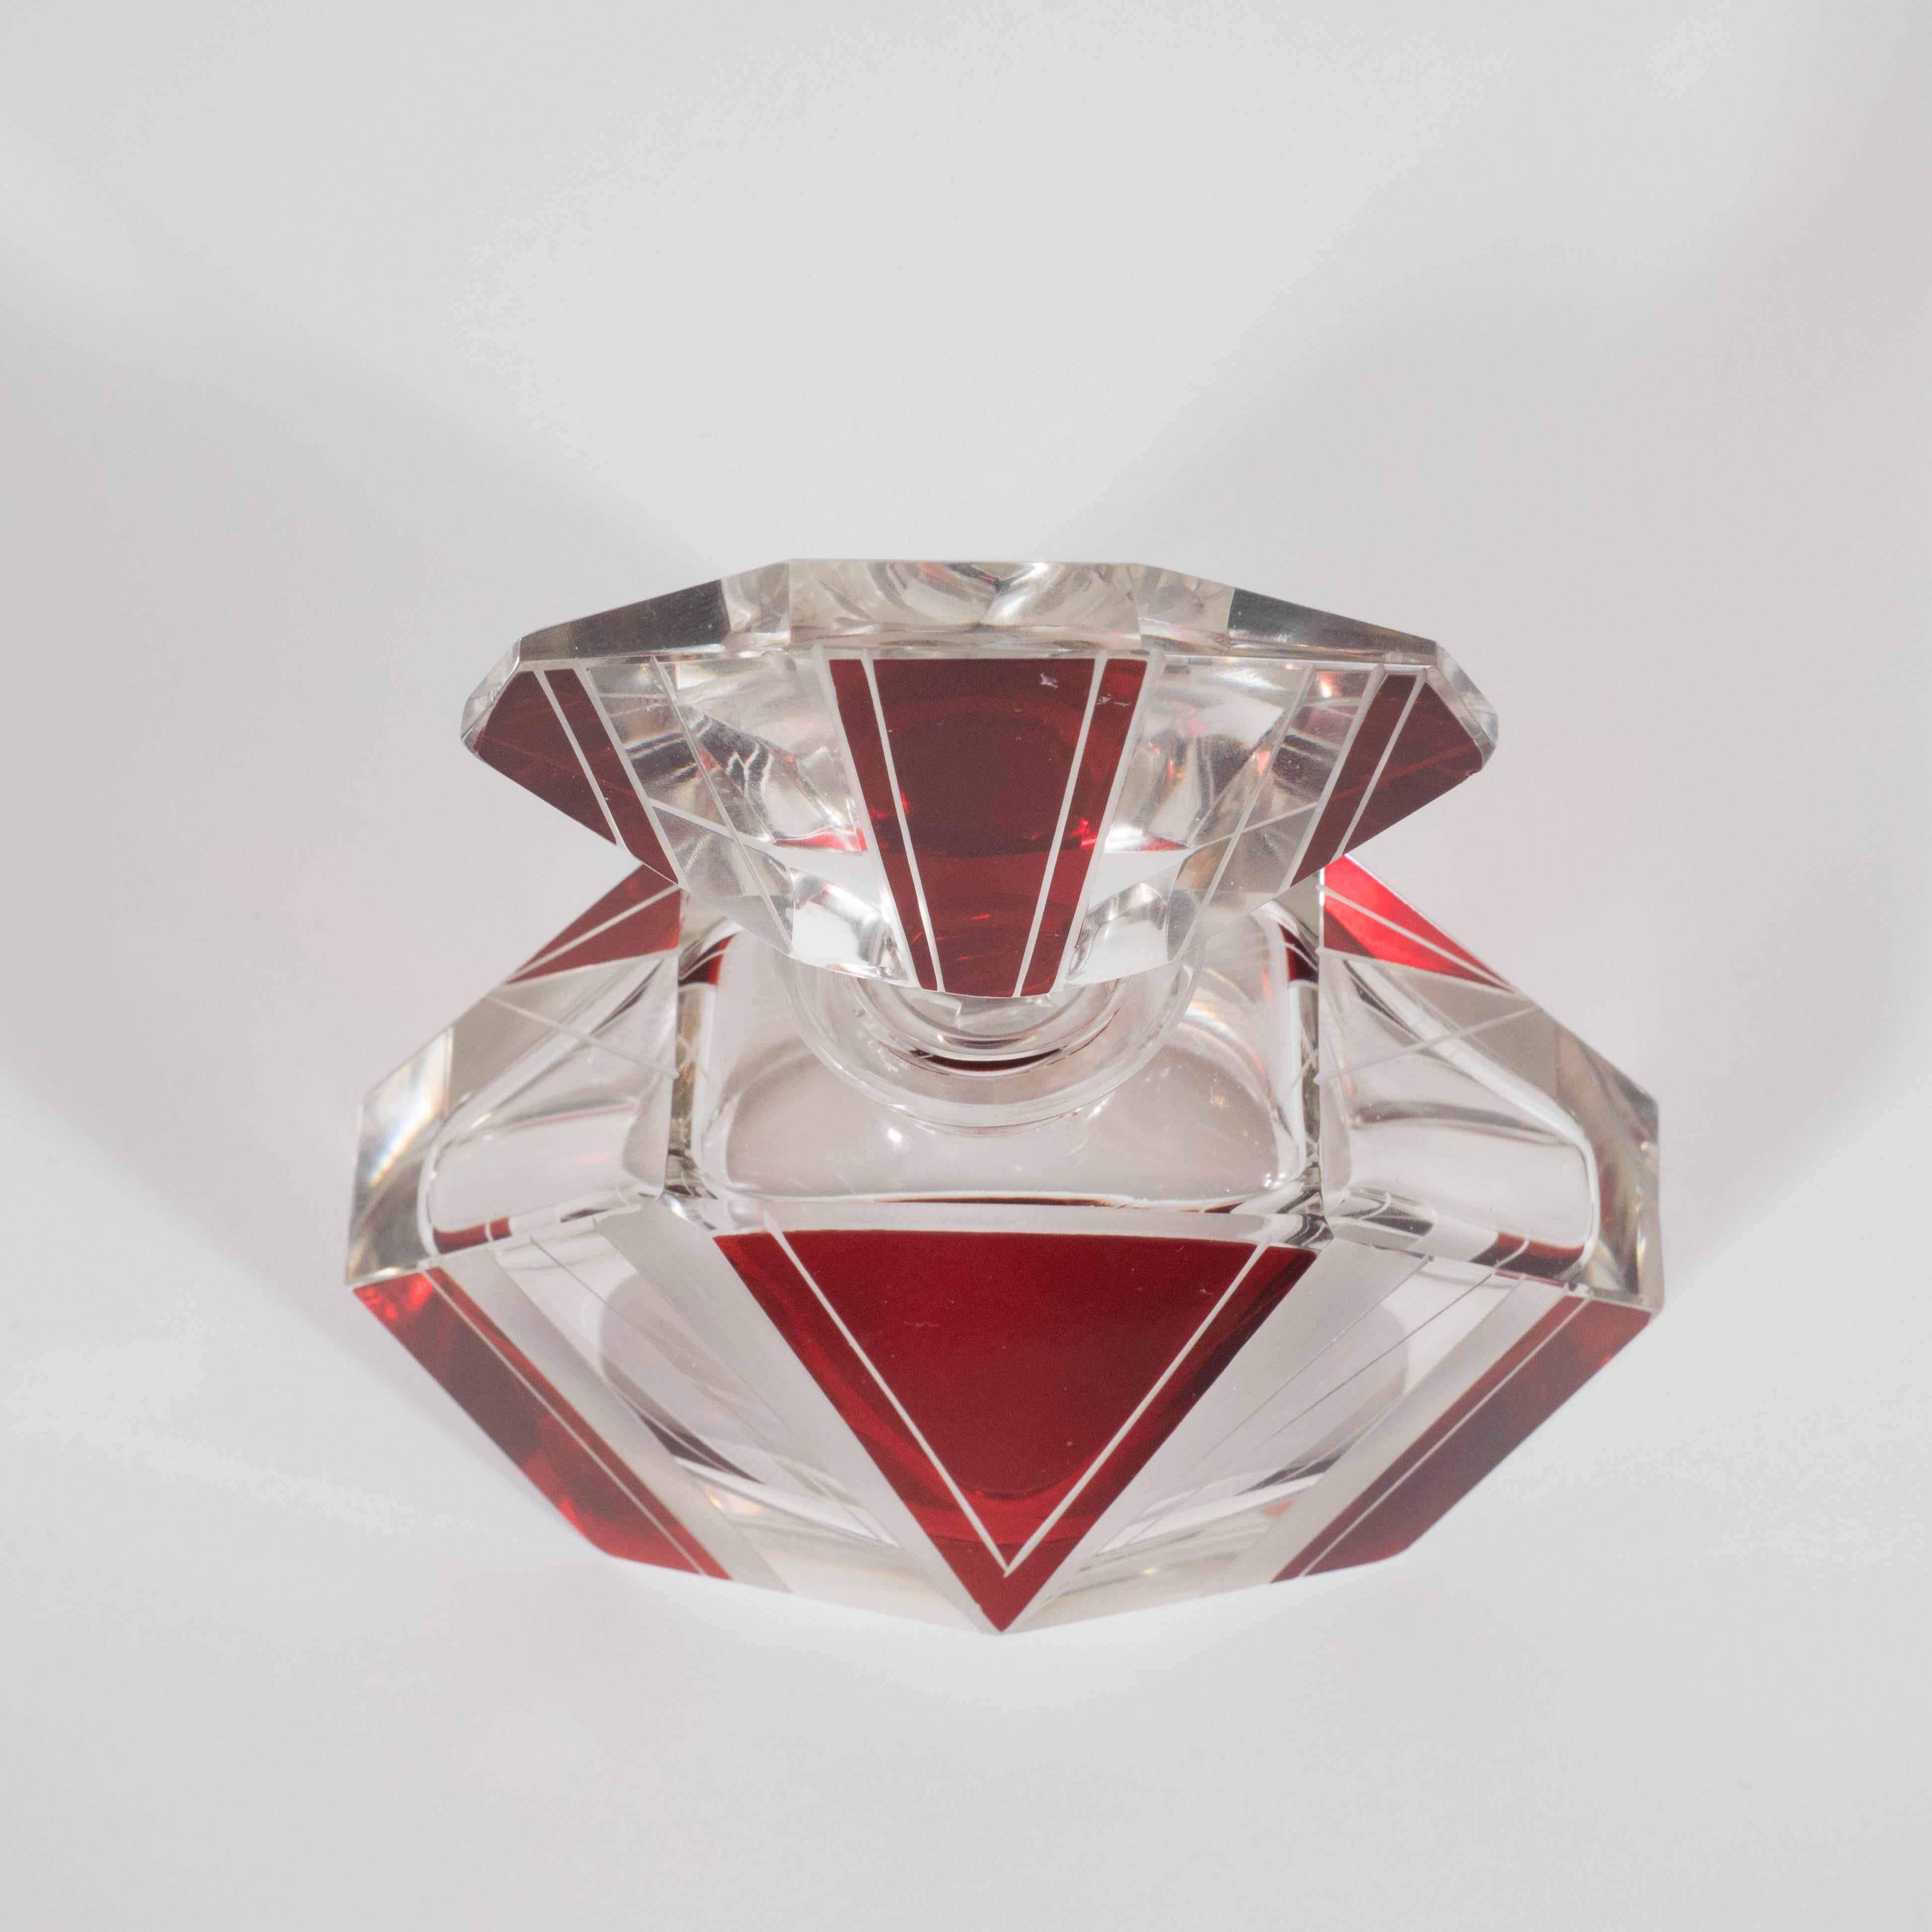 Czech Art Deco Perfume Bottle in Crimson and Clear Glass with Geometric Designs 1